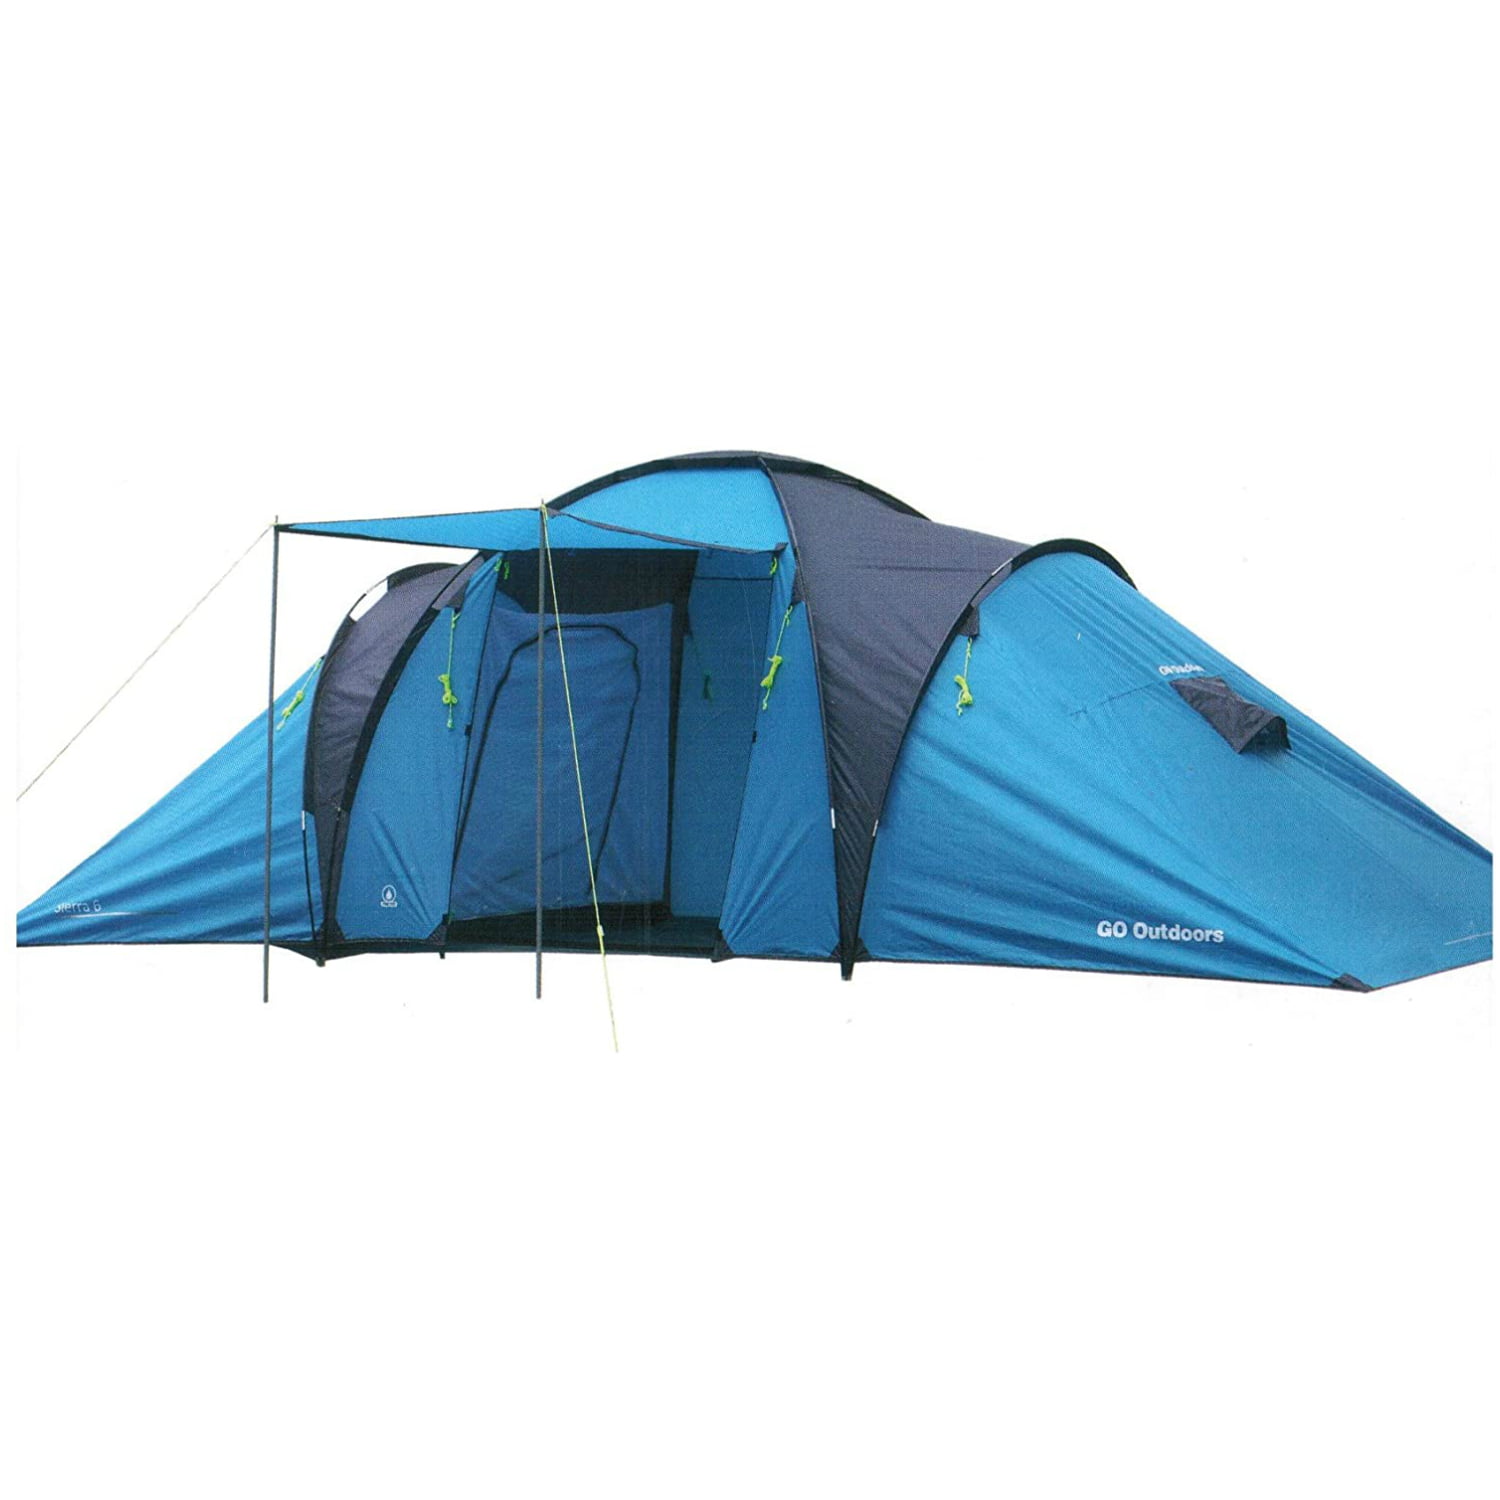 GO Outdoor 2 Room Family Tent (6 Person Family Tent Sierra 6